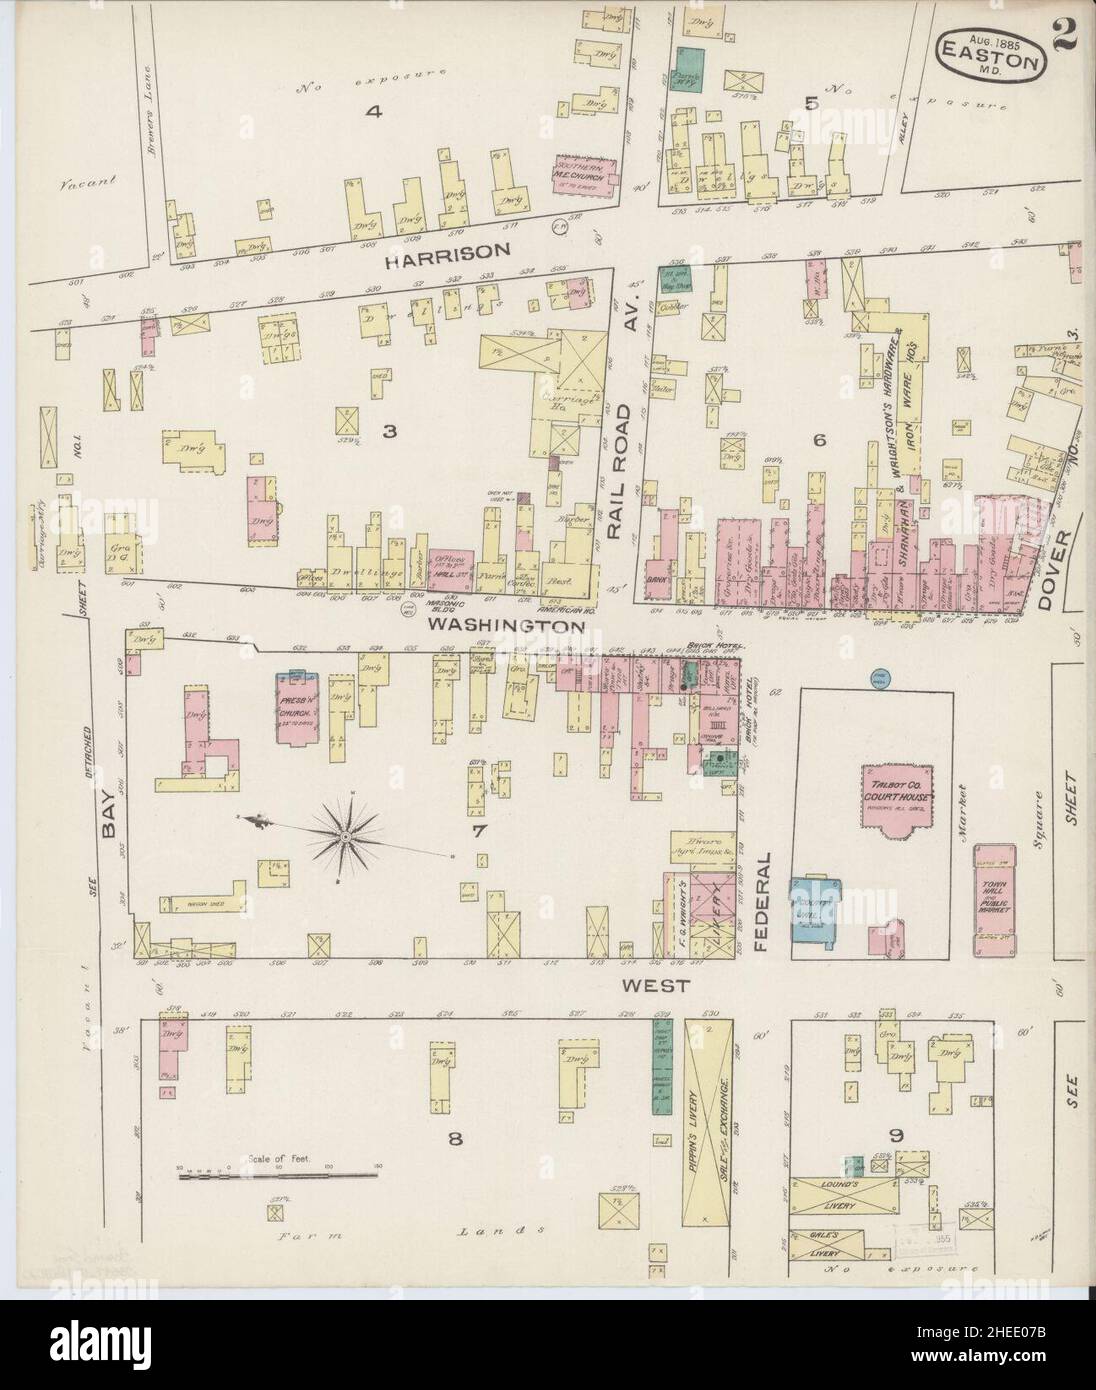 Sanborn Fire Insurance Map from Easton, Talbot County, Maryland. Stock Photo